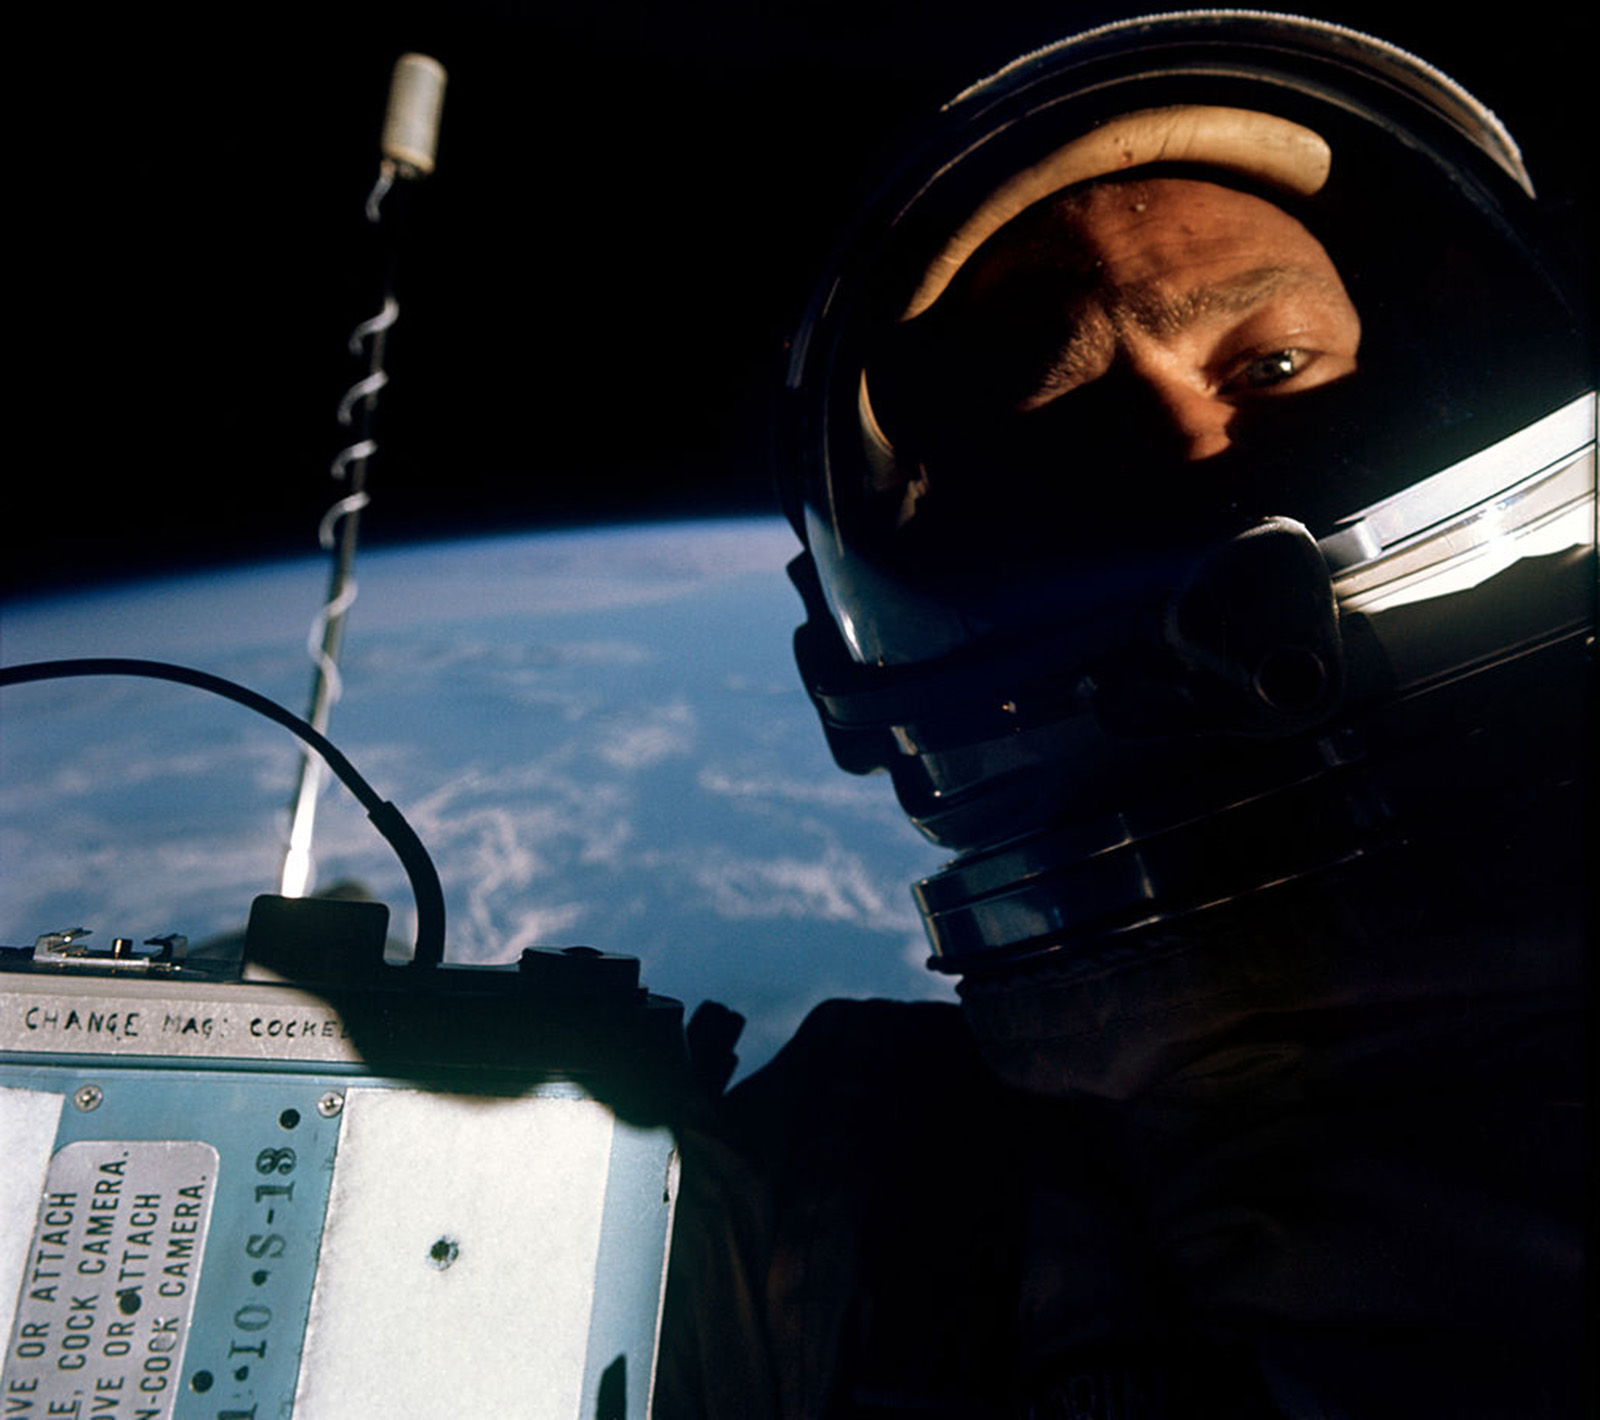 Buzz taking the first selfie in space on the 1966 Gemini 12 mission